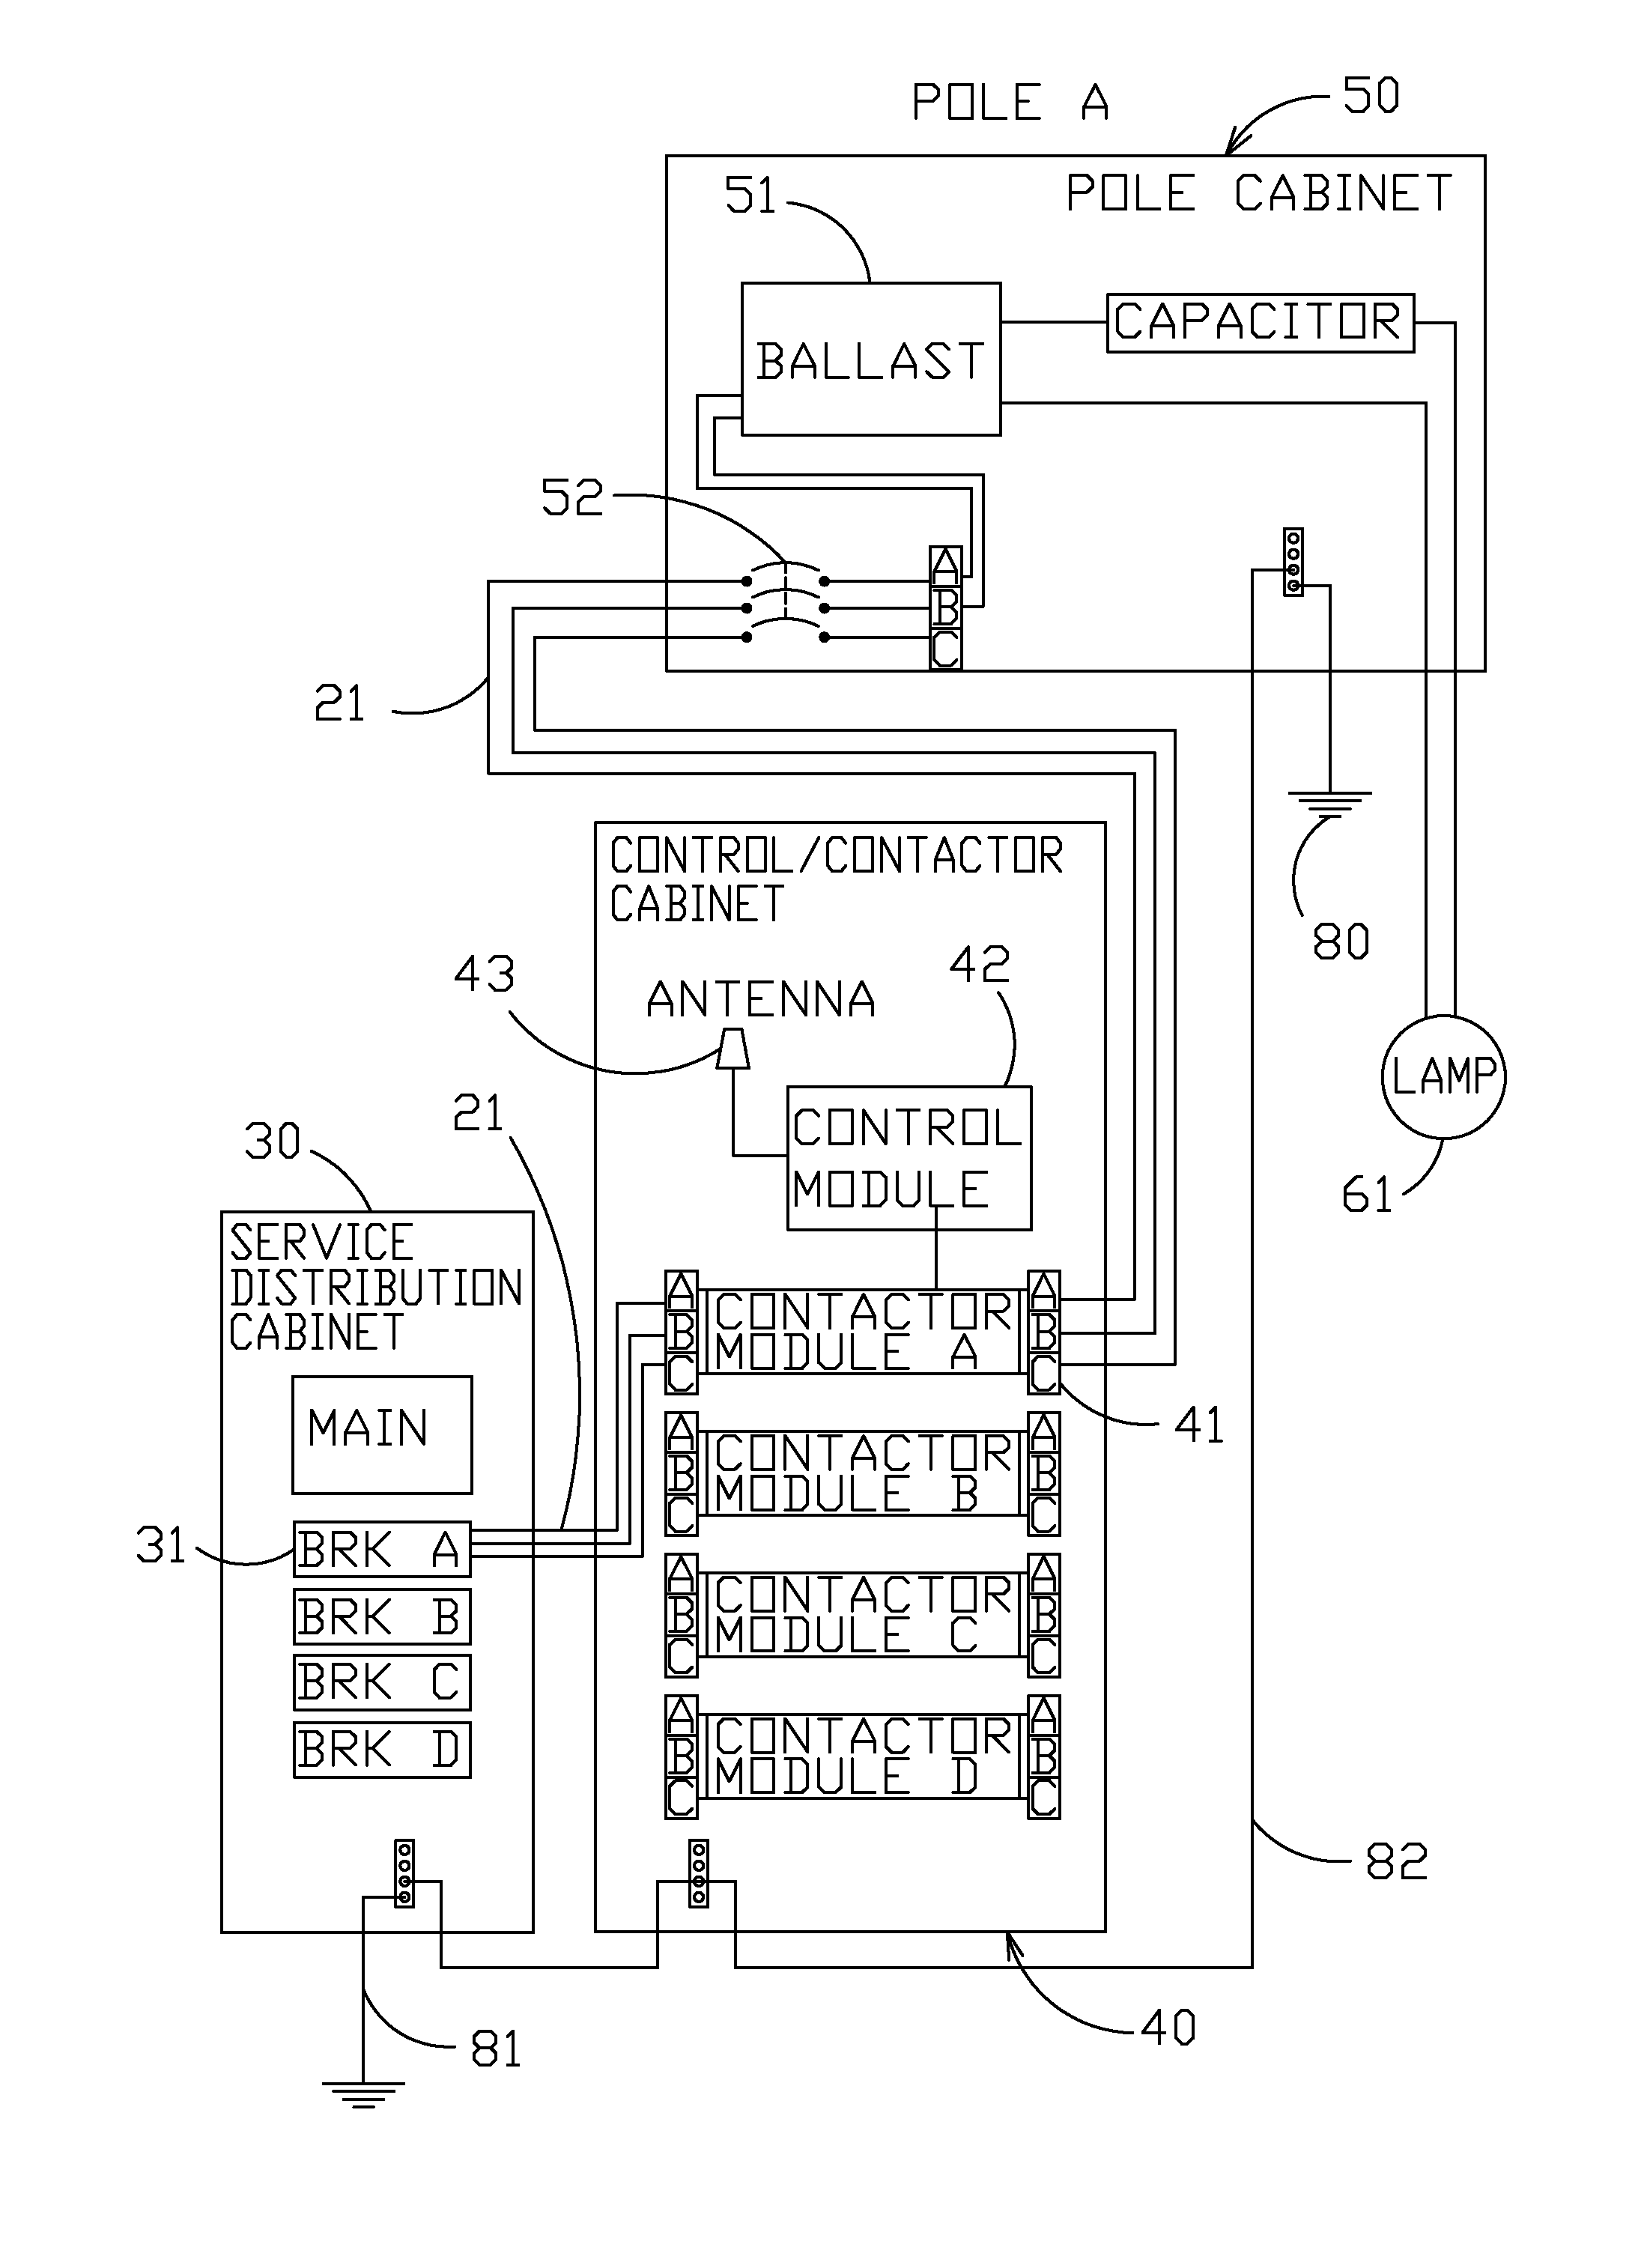 Apparatus, method, and system for integrating ground fault circuit interrupters in equipment-grounded high voltage systems